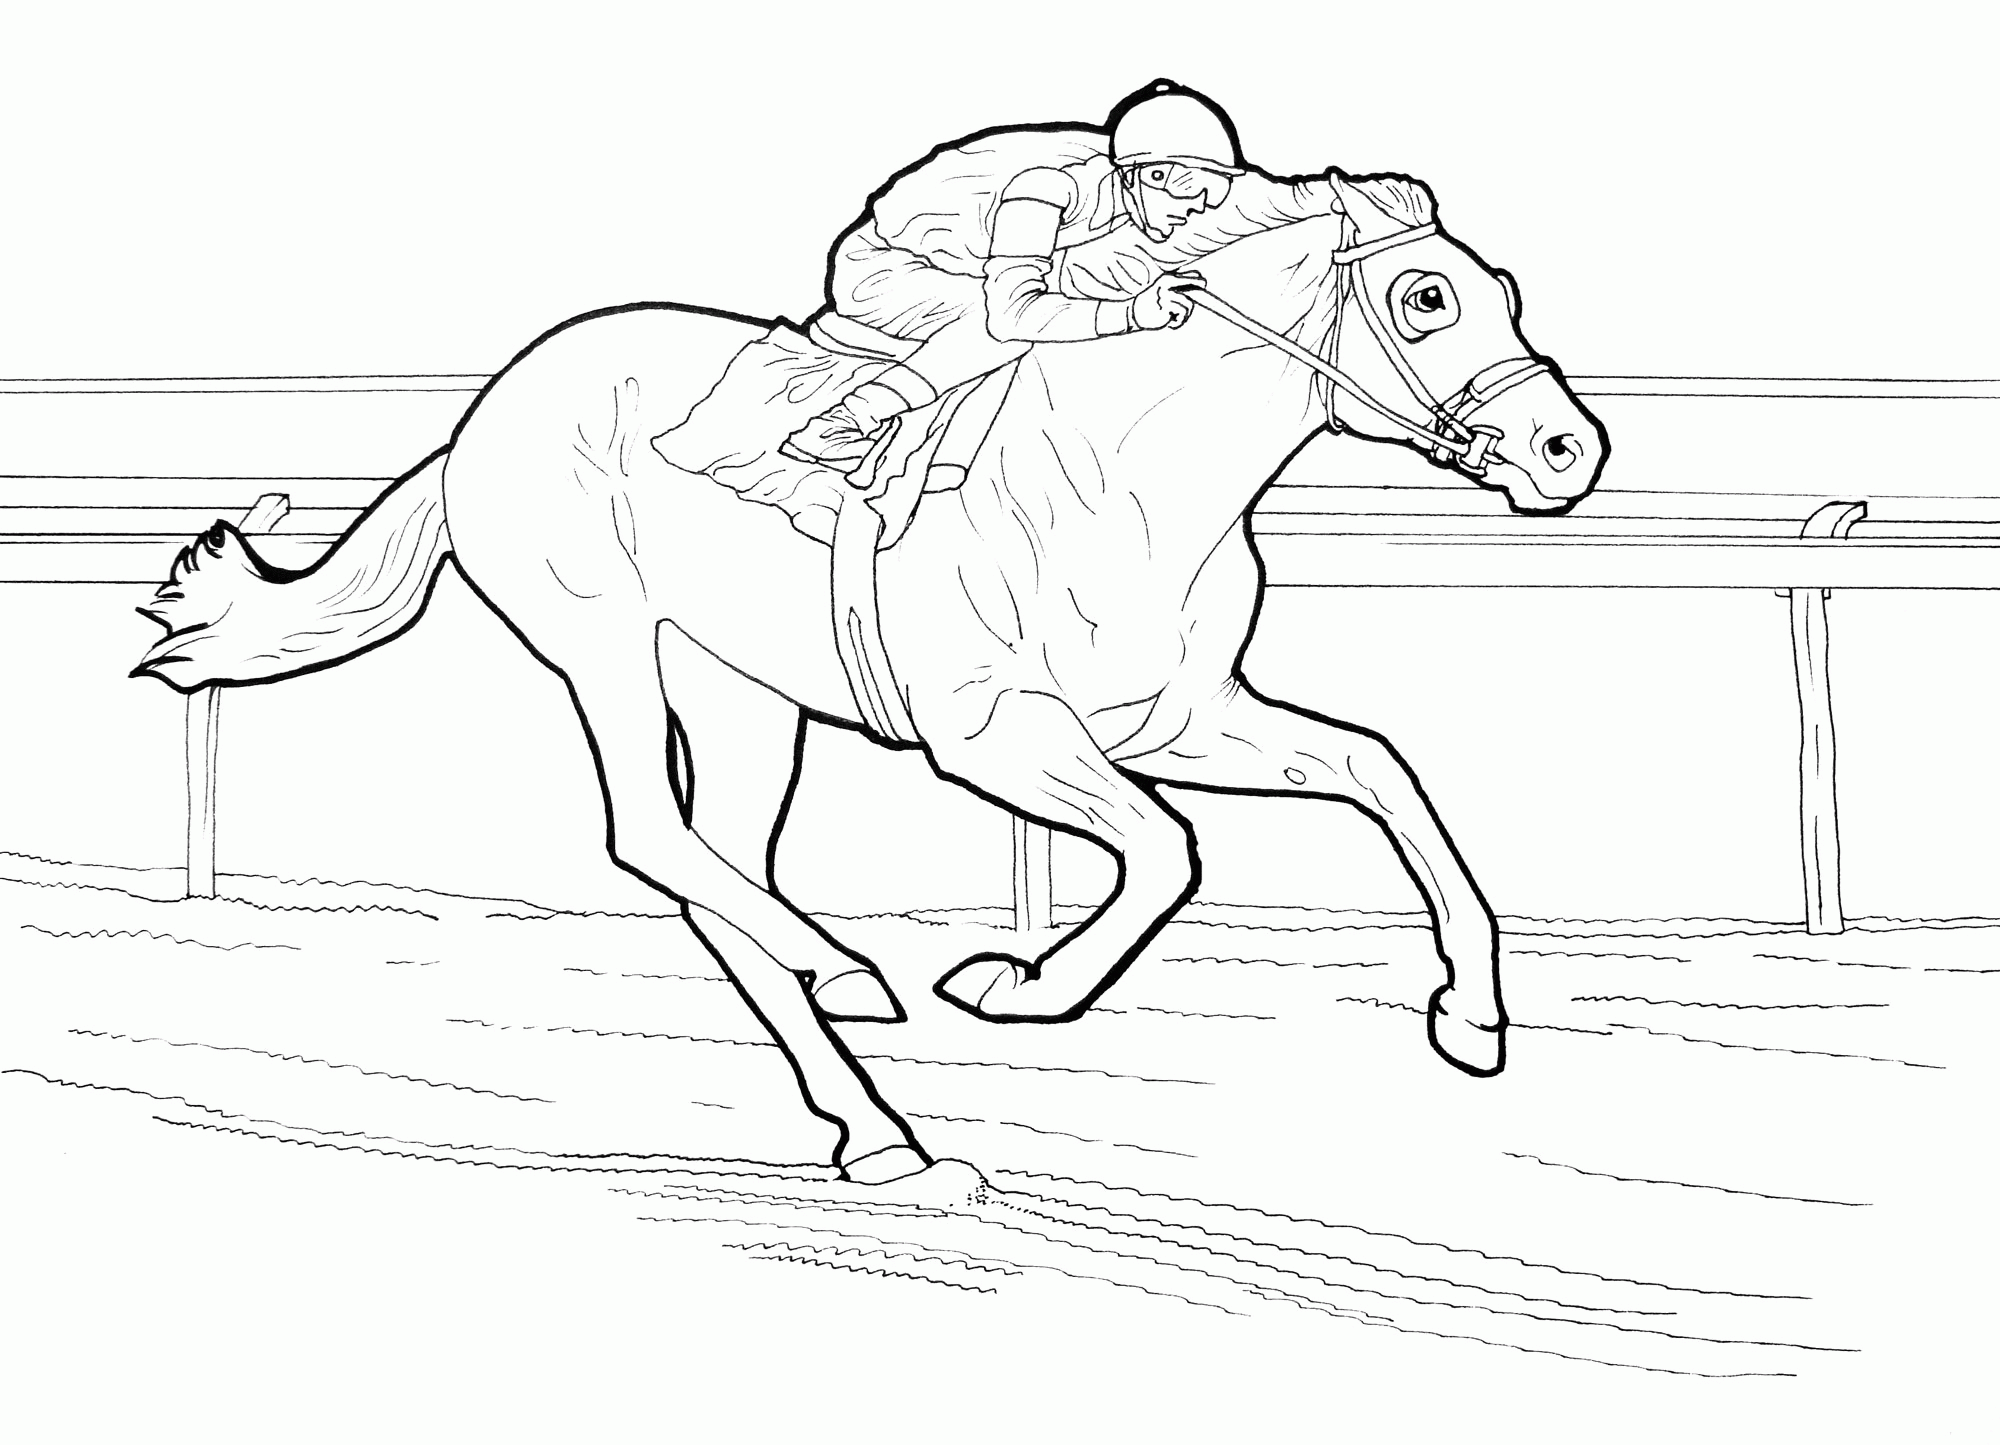 Horse Racing Printable Coloring Page - Coloring